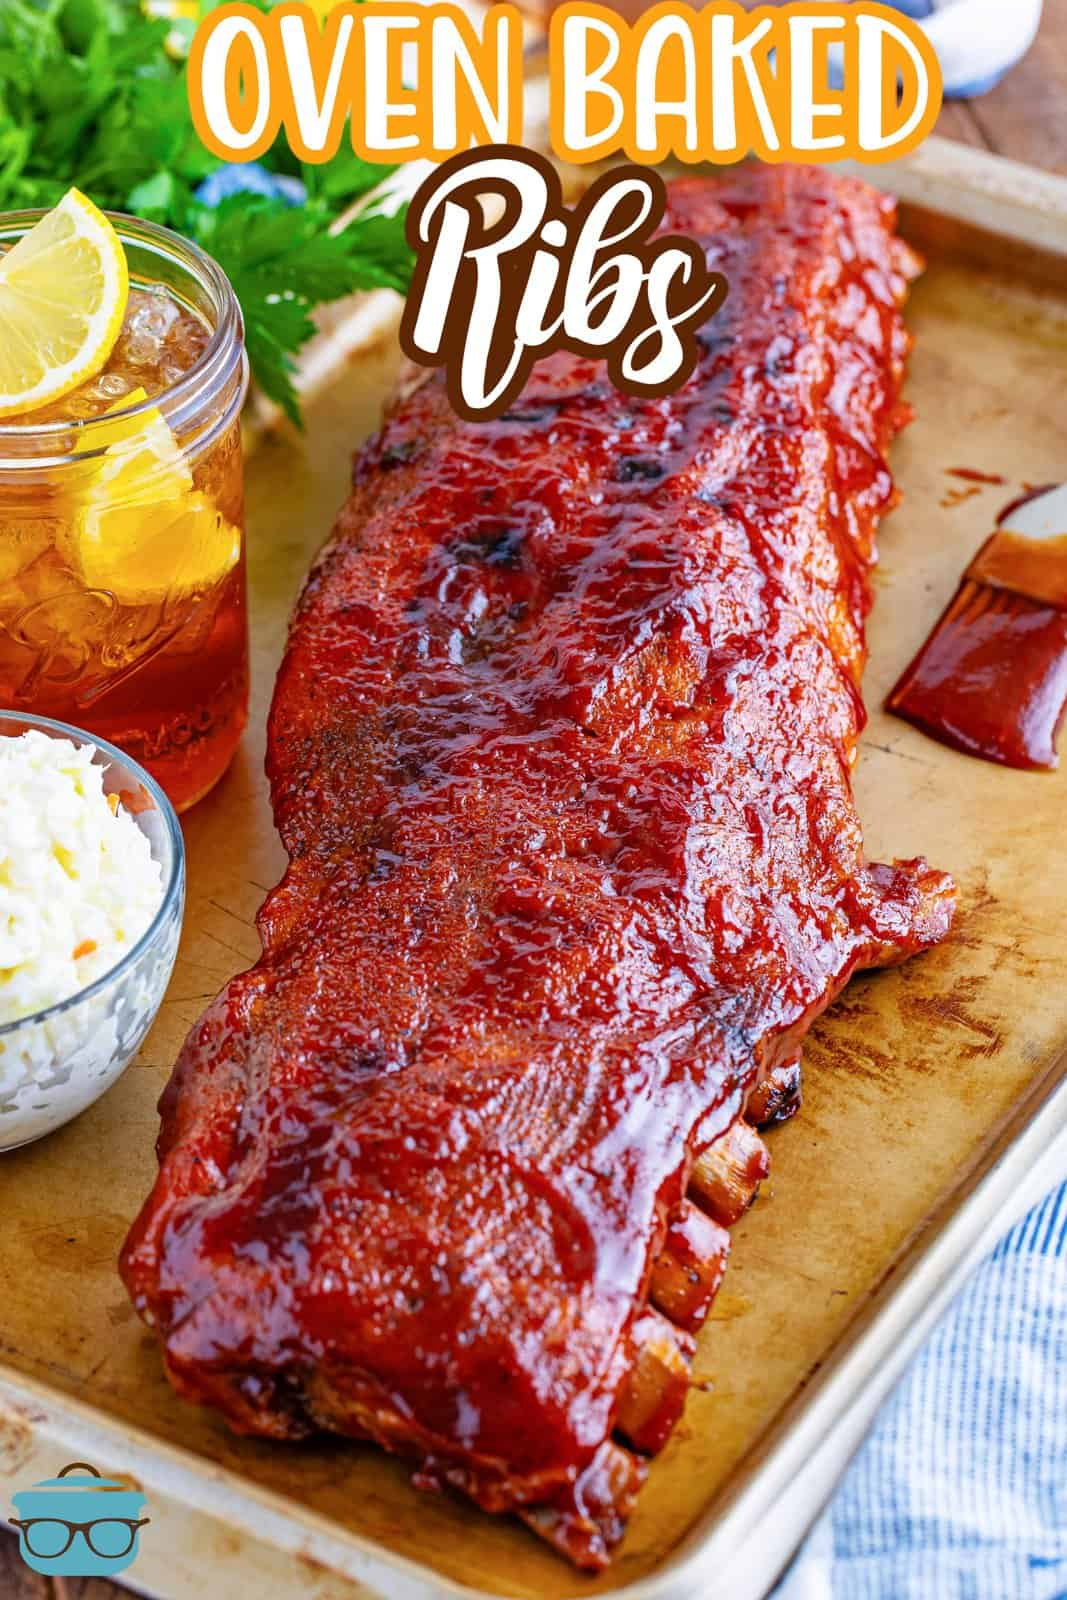 A slab of ribs baked in the oven.